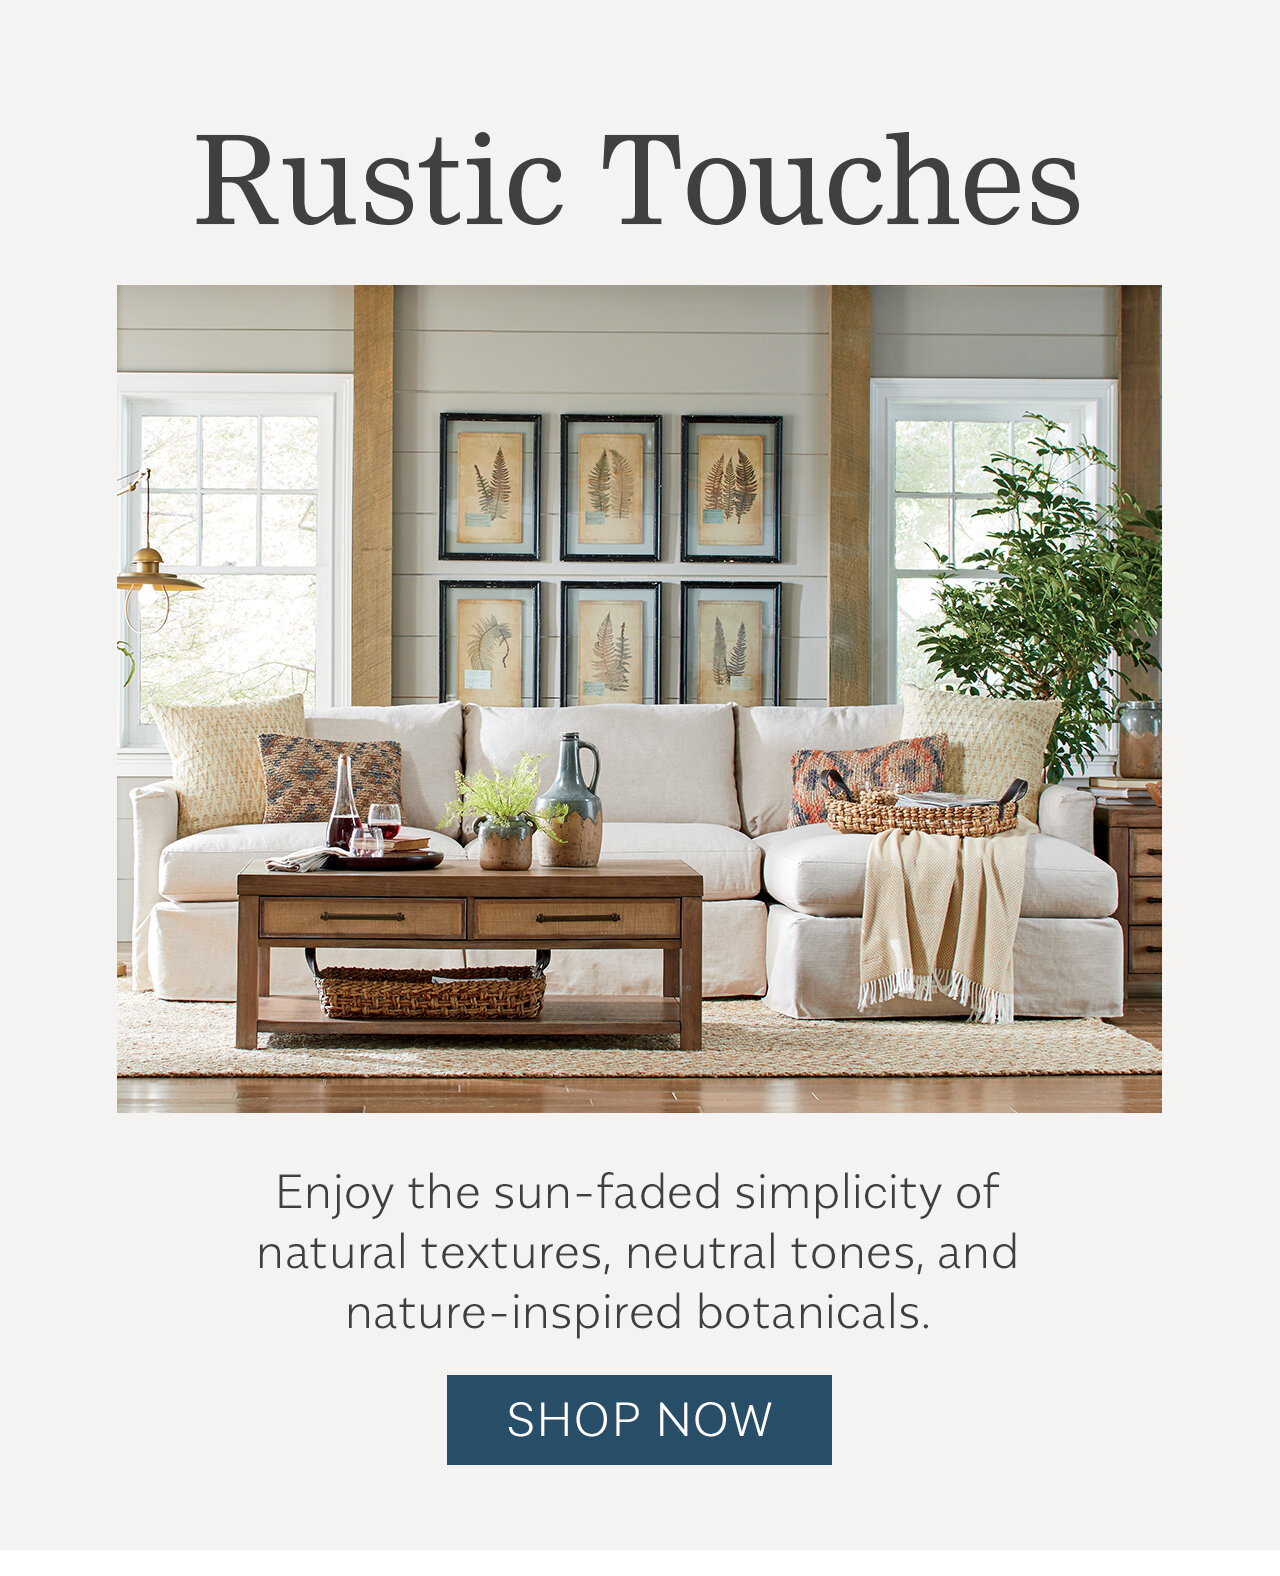 Rustic Touches